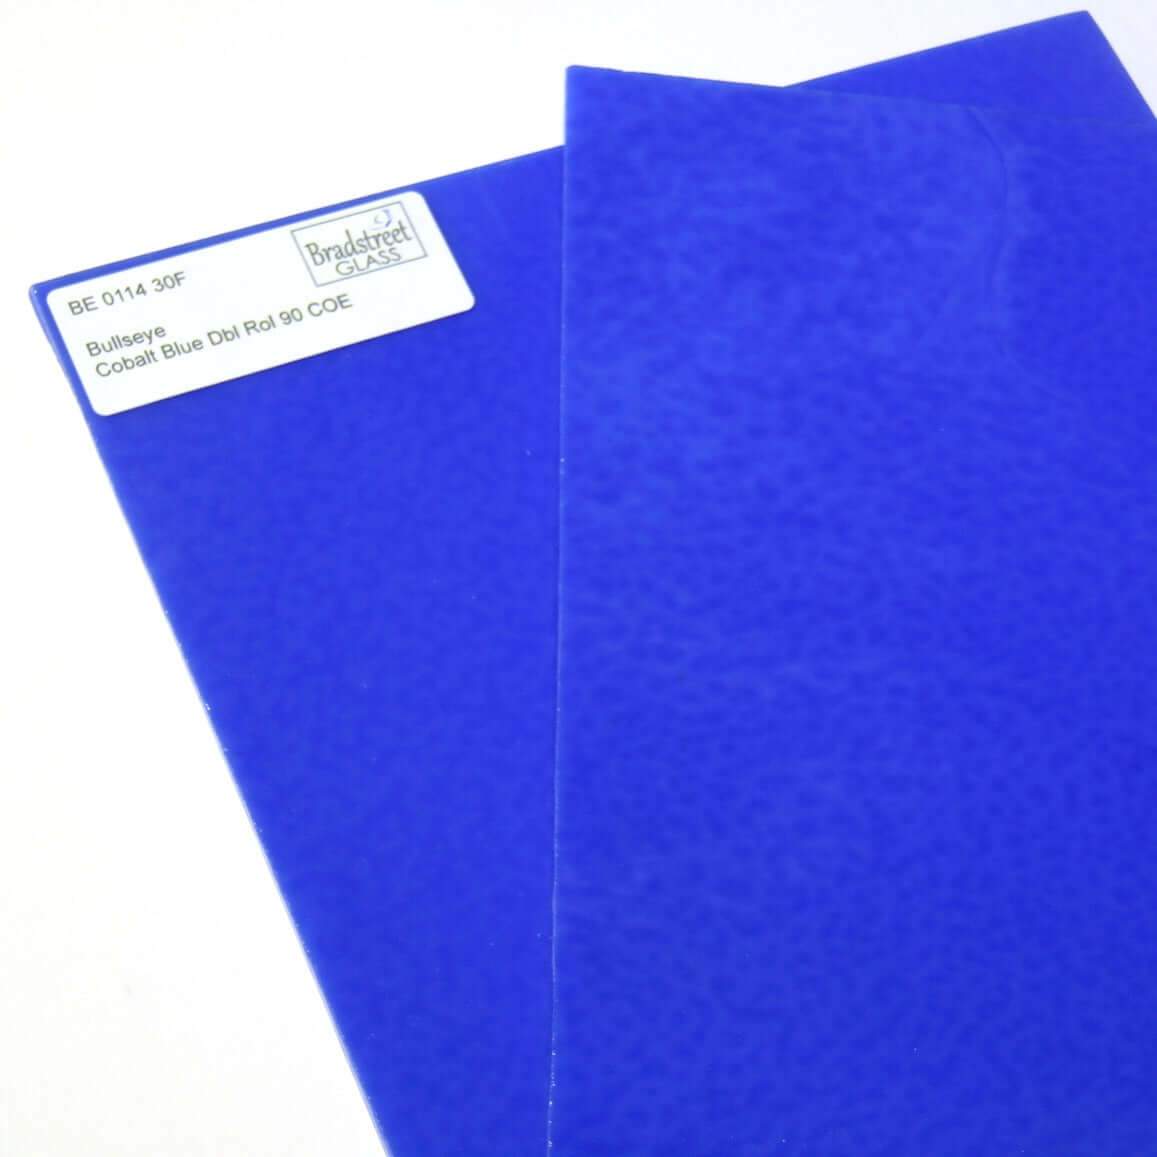 Cobalt Blue Fusible 8x8 Stained Glass Sheet 90 COE Double Rolled Bullseye 0114 30F